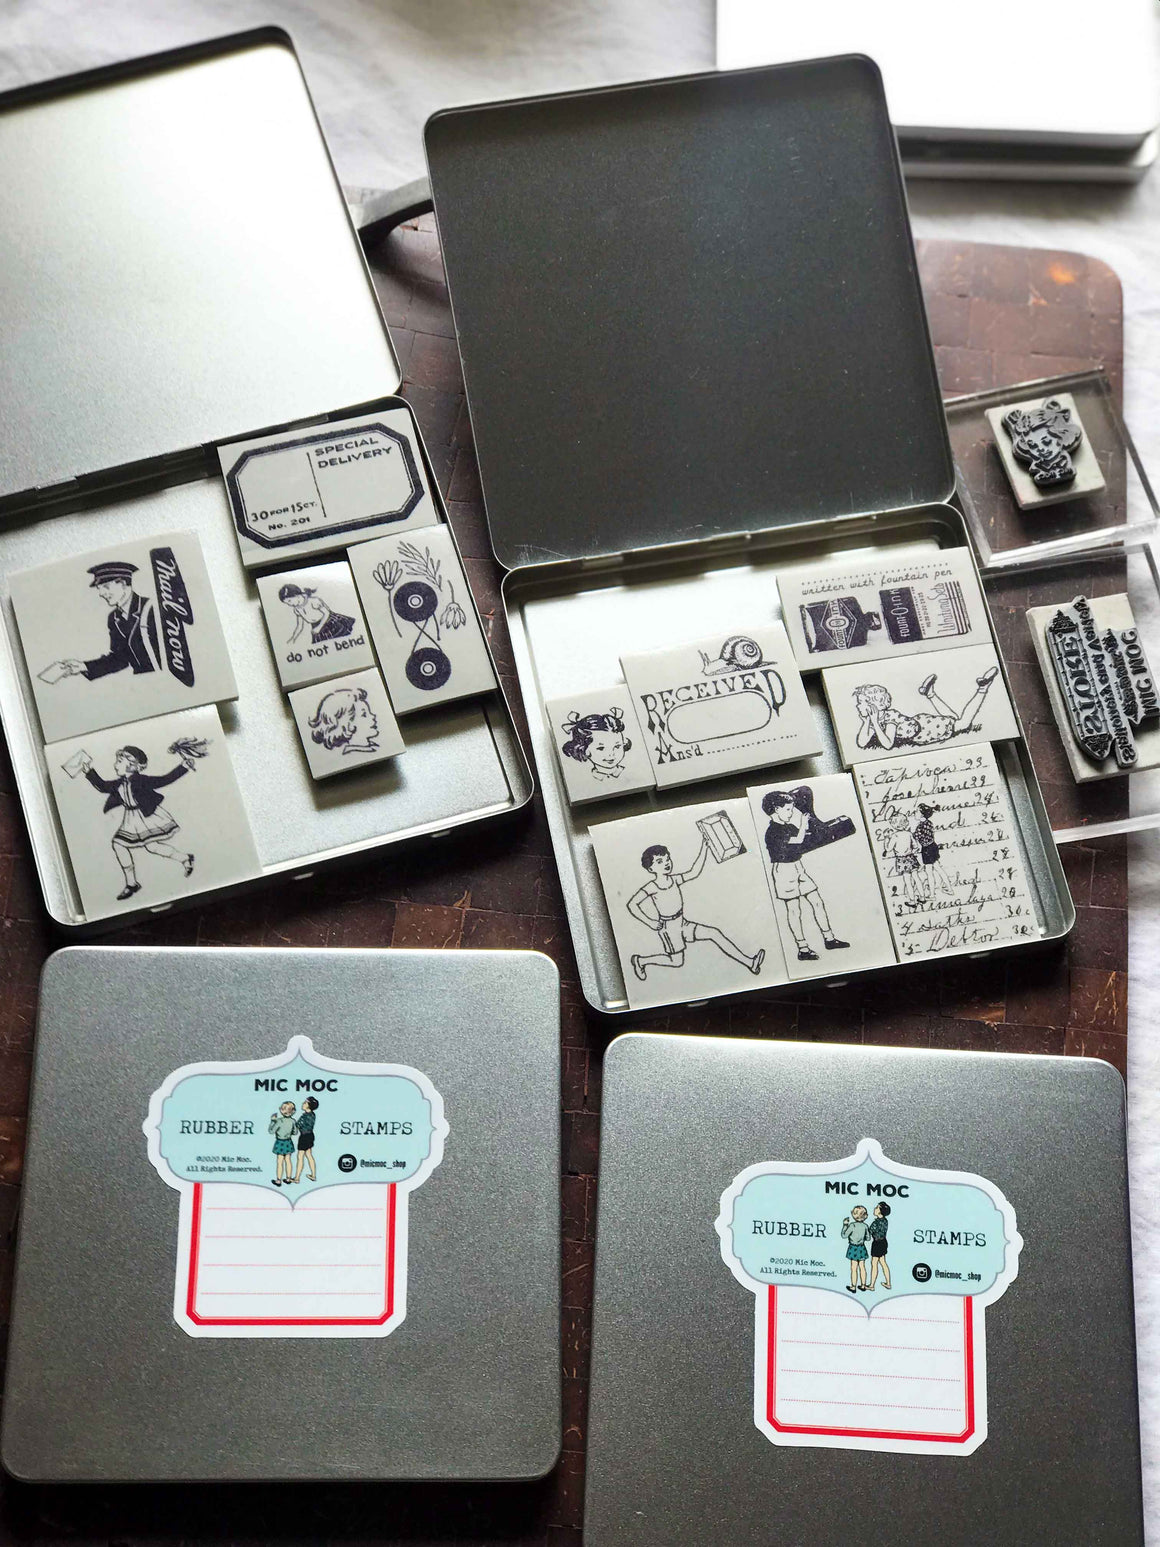 Cling Rubber Stamp Storage Tin from micmoc.com at Mic Moc